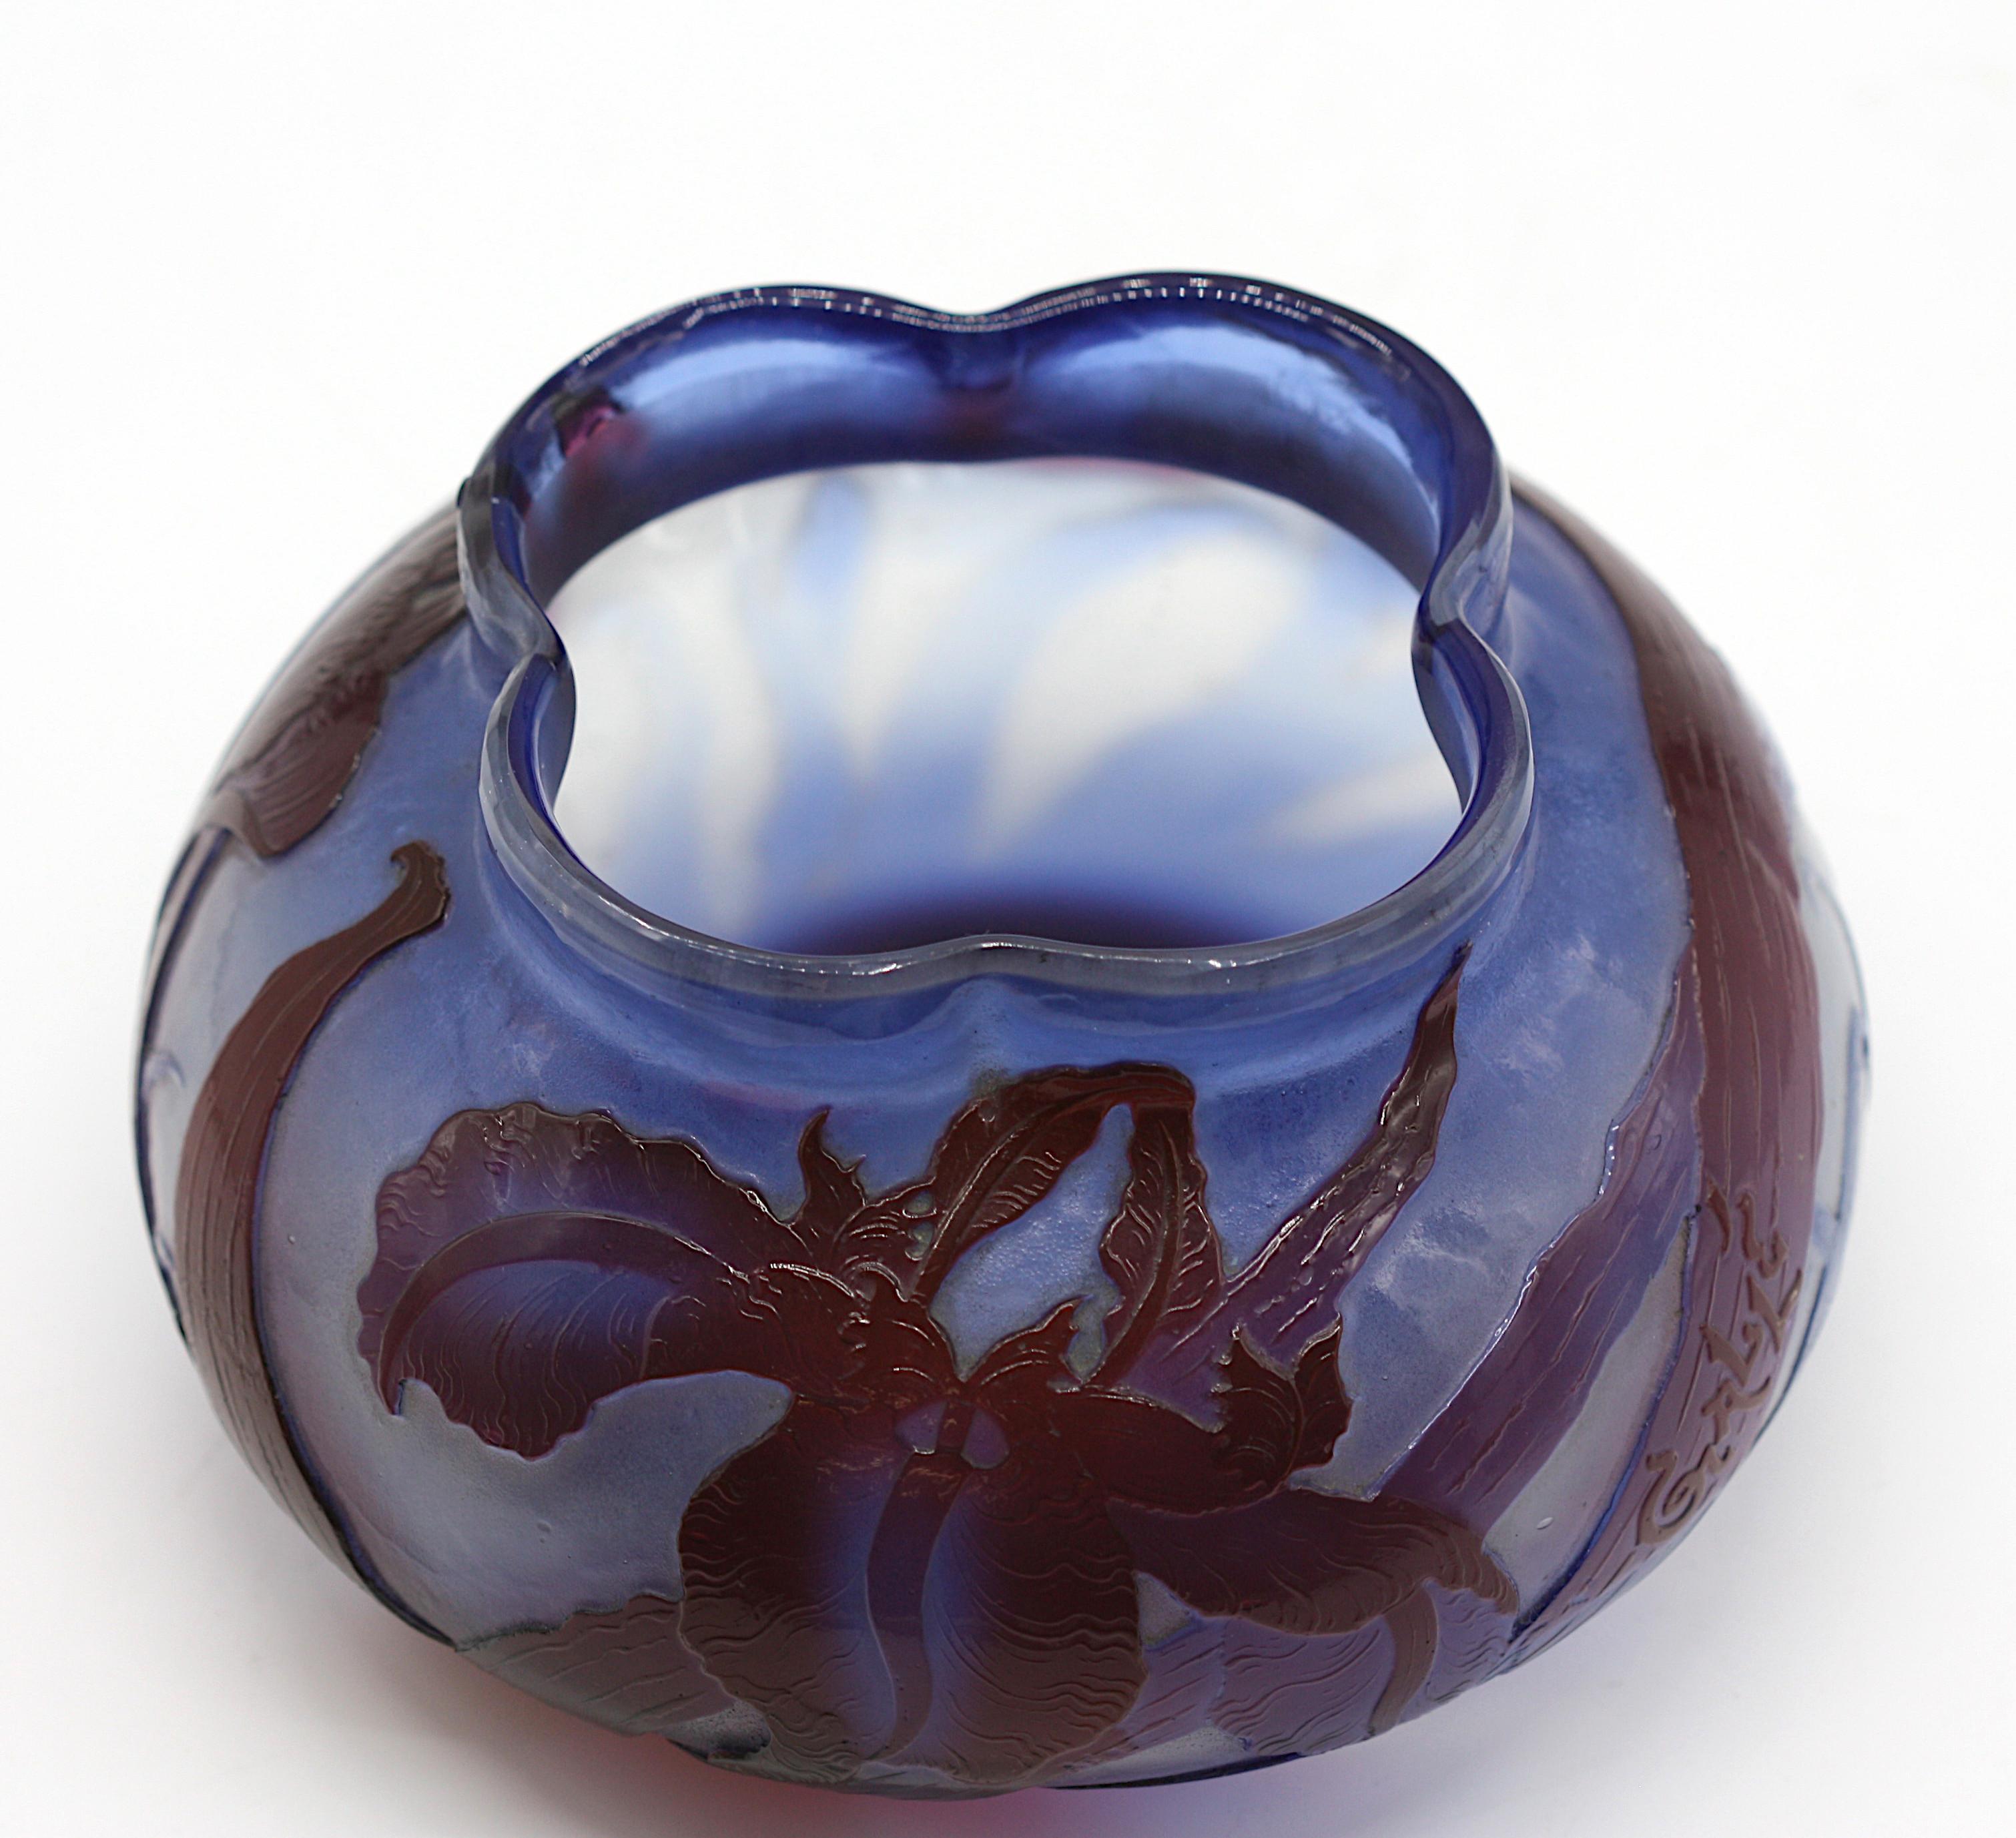 Emile Galle Cameo Glass Vase, 'Flowers' For Sale 1